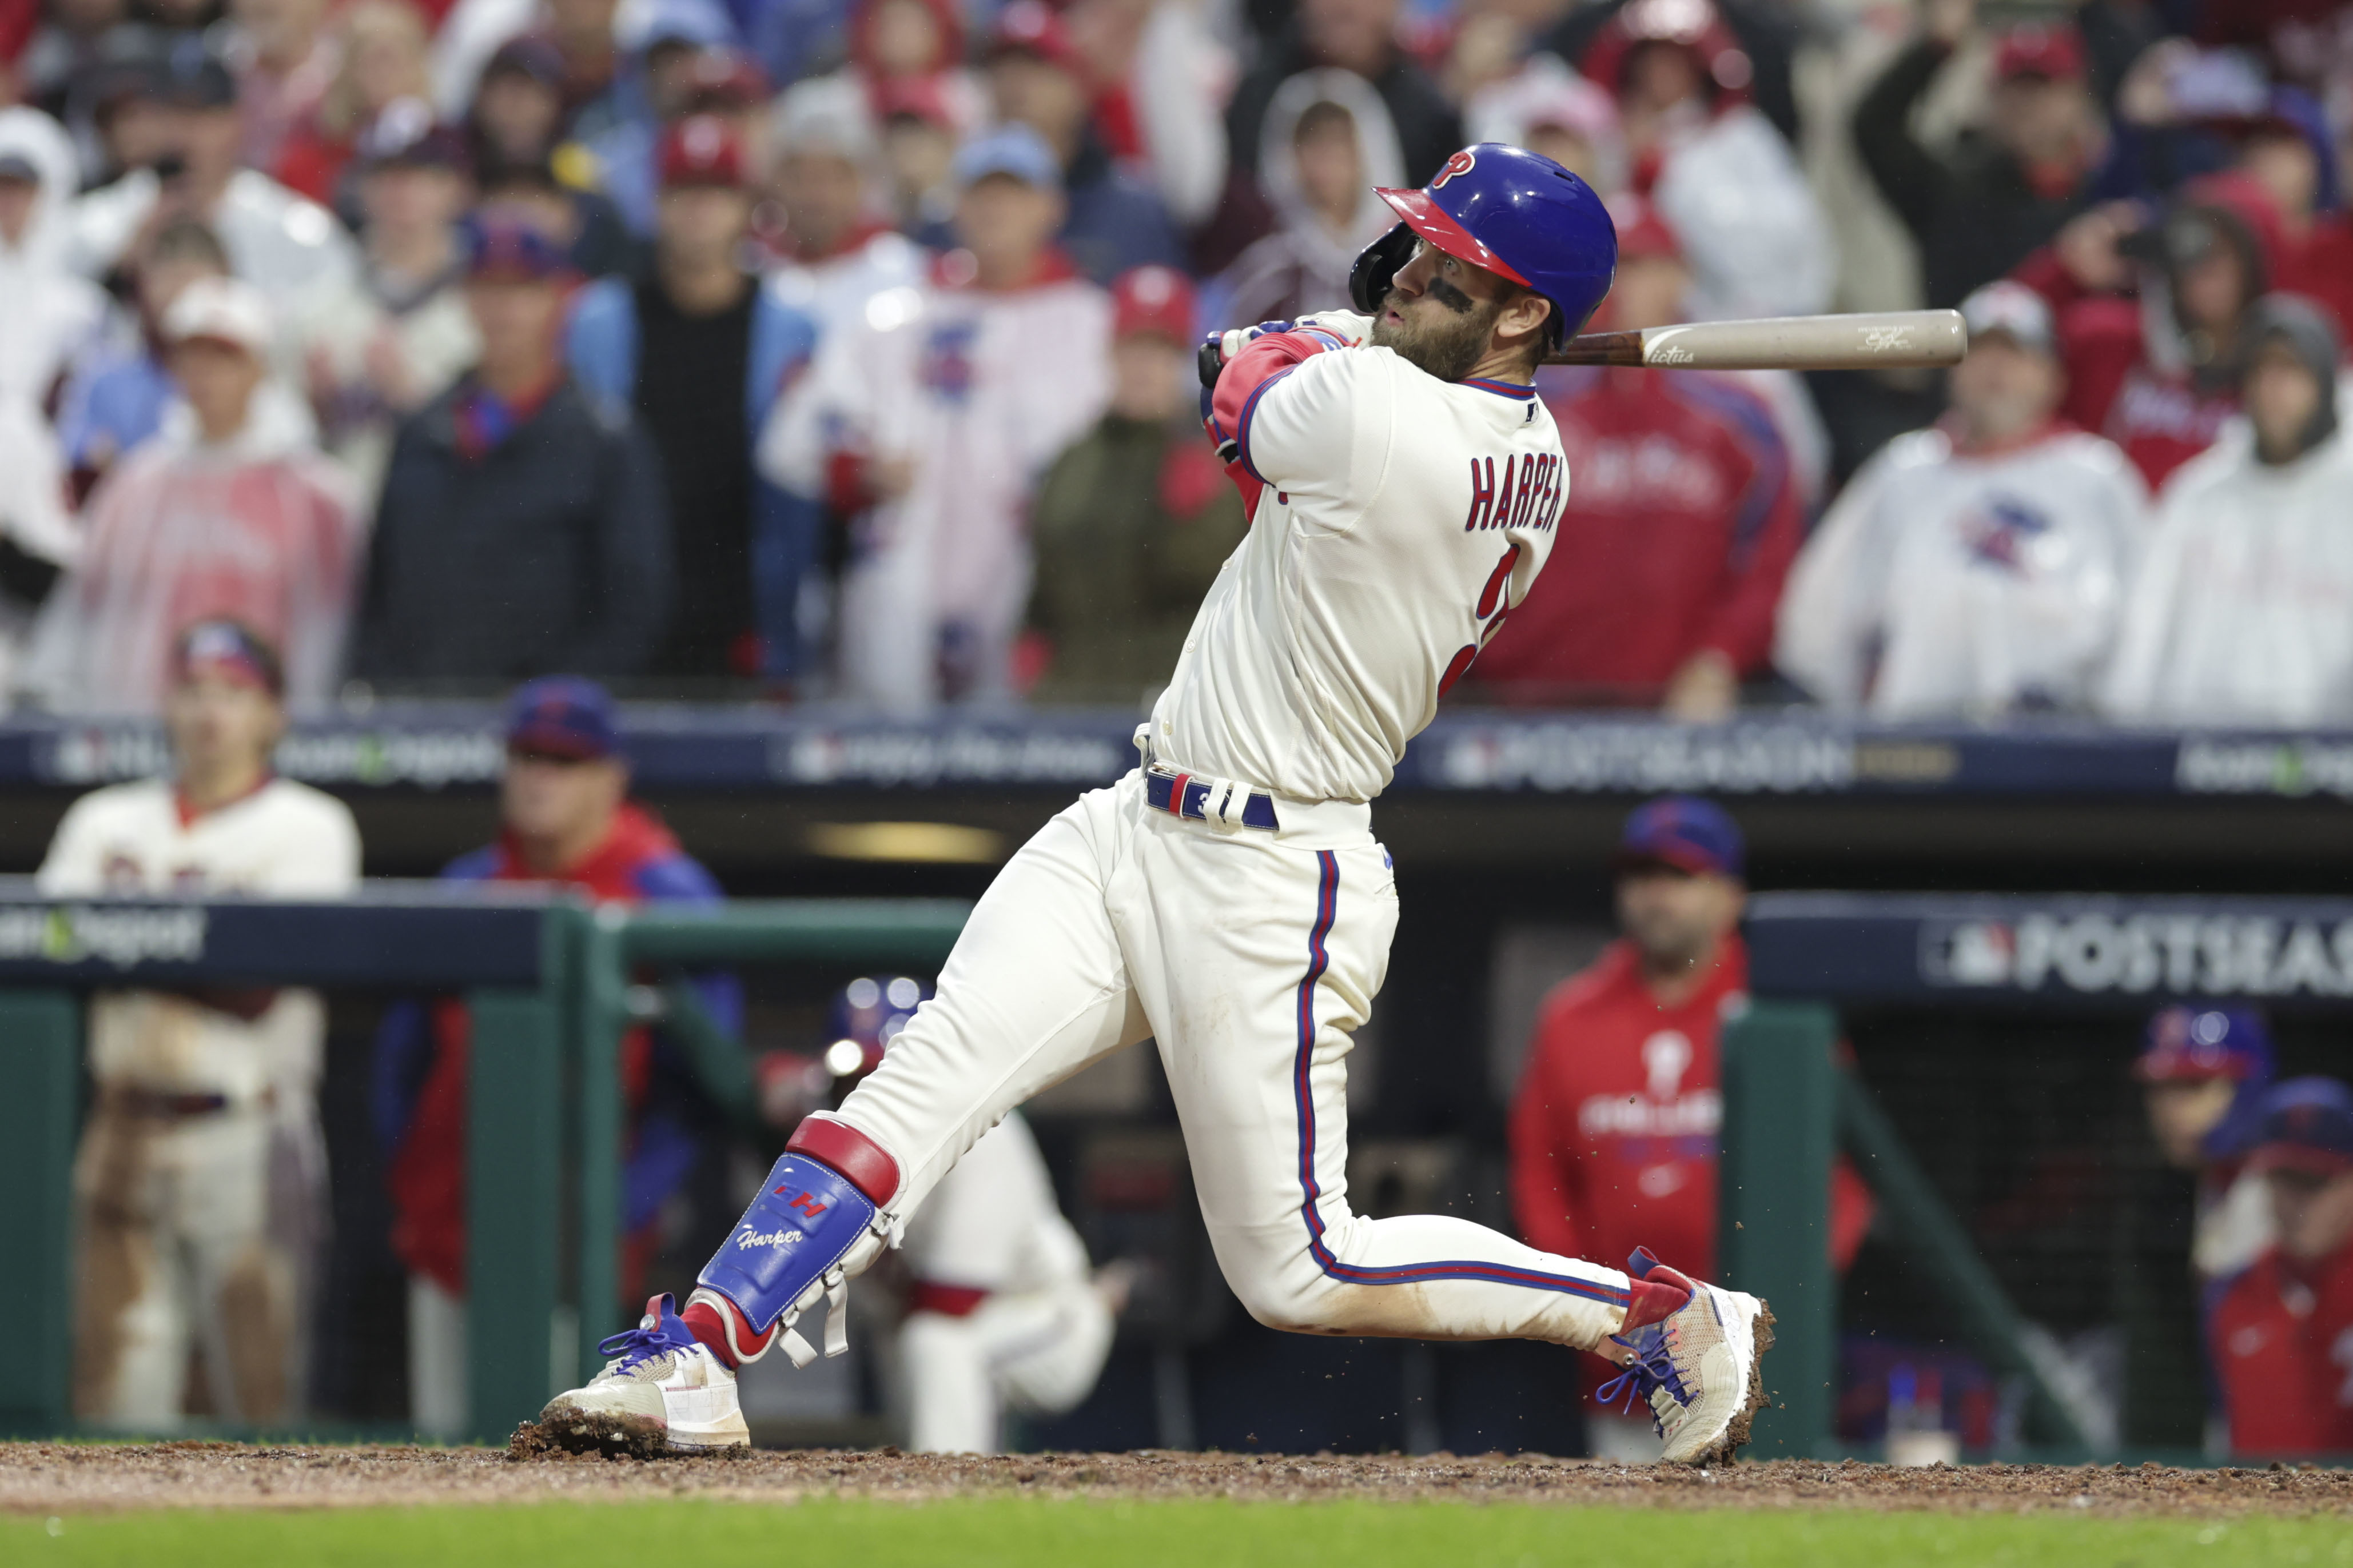 Ranger Suárez Is Proving To Be the Number Three Starter the Philadelphia  Phillies Need for the Postseason - Sports Illustrated Inside The Phillies